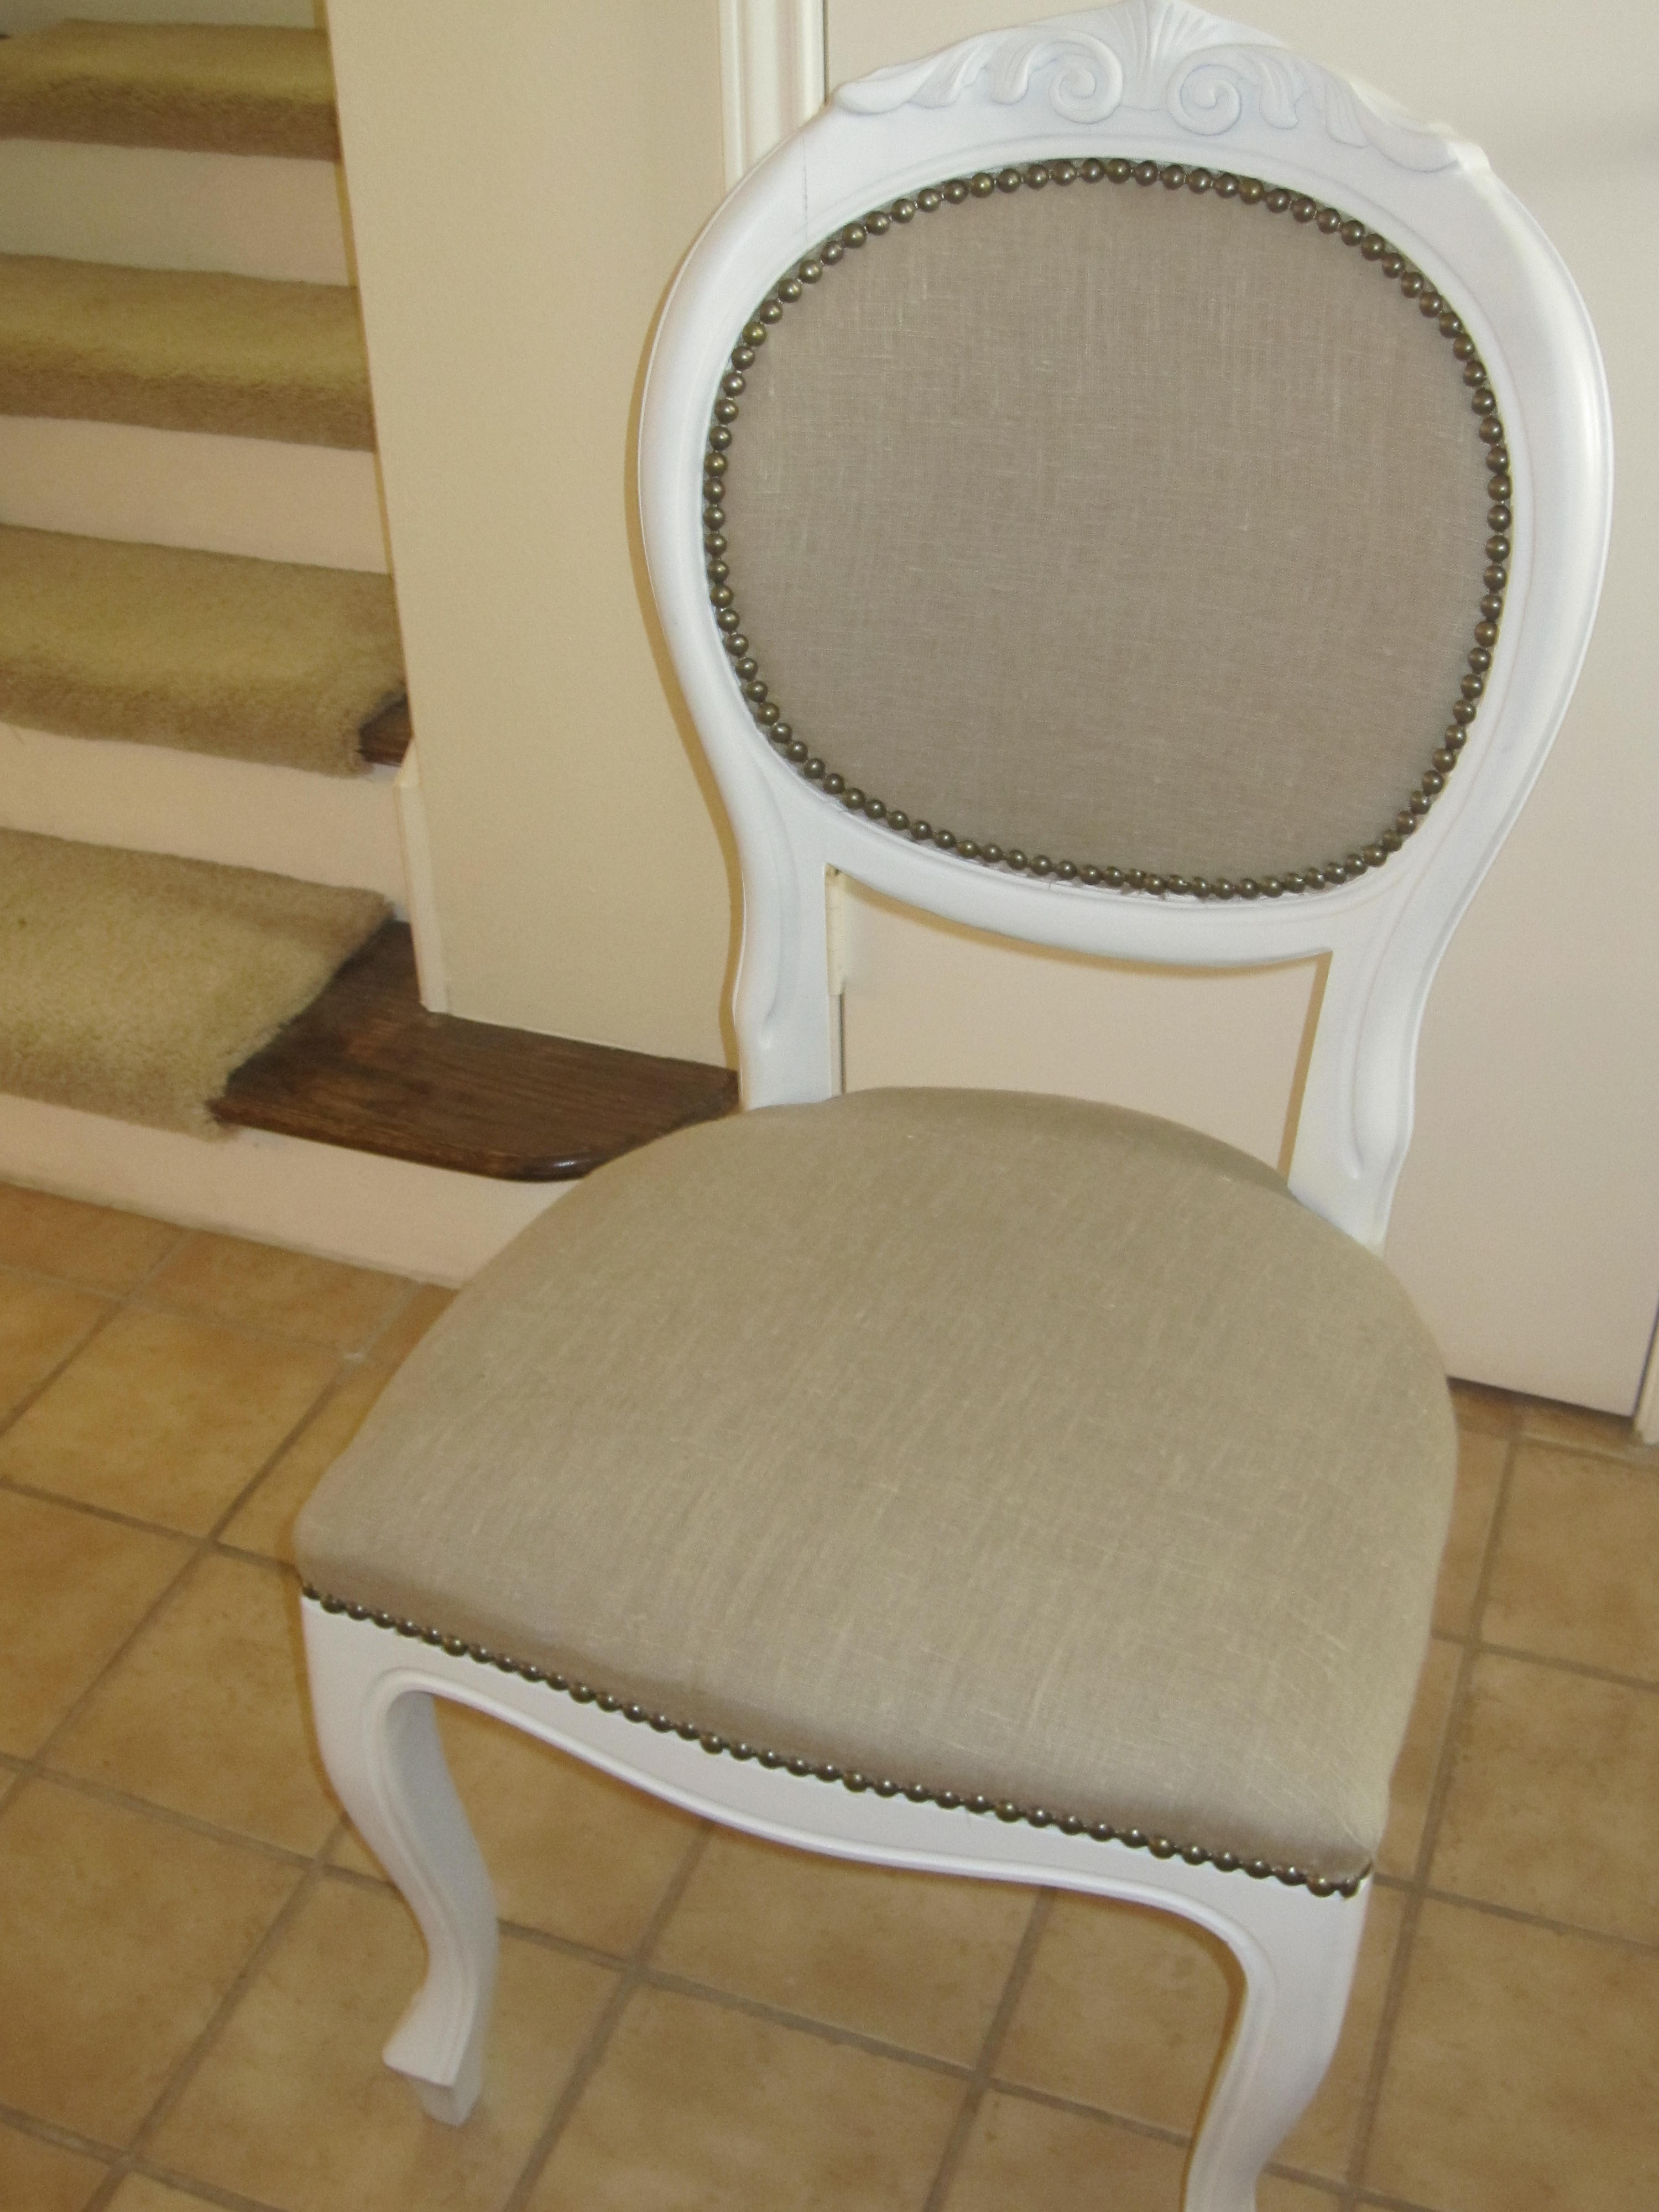 How much fabric is required to upholster 17 x 20 dining room chair